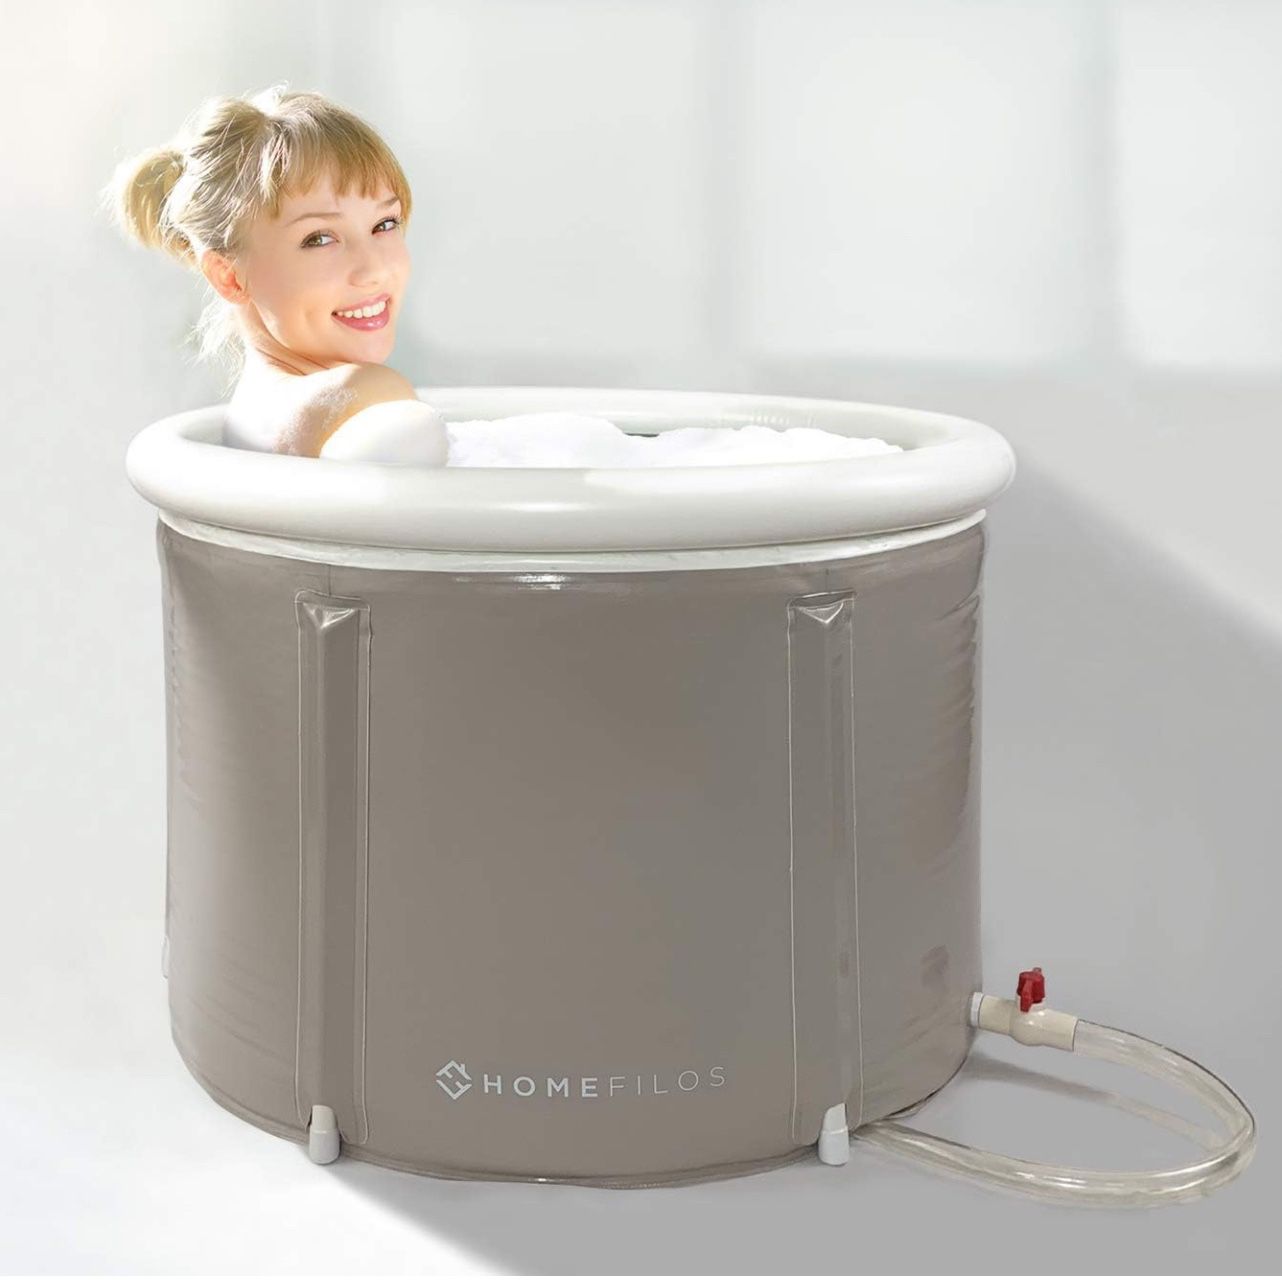 Portable Bathtub (Small) by Homefilos, Ice Bath and Cold Plunge for Athletes, Inflatable Adult Size Japanese Soaking Hot Tub for Shower Stall